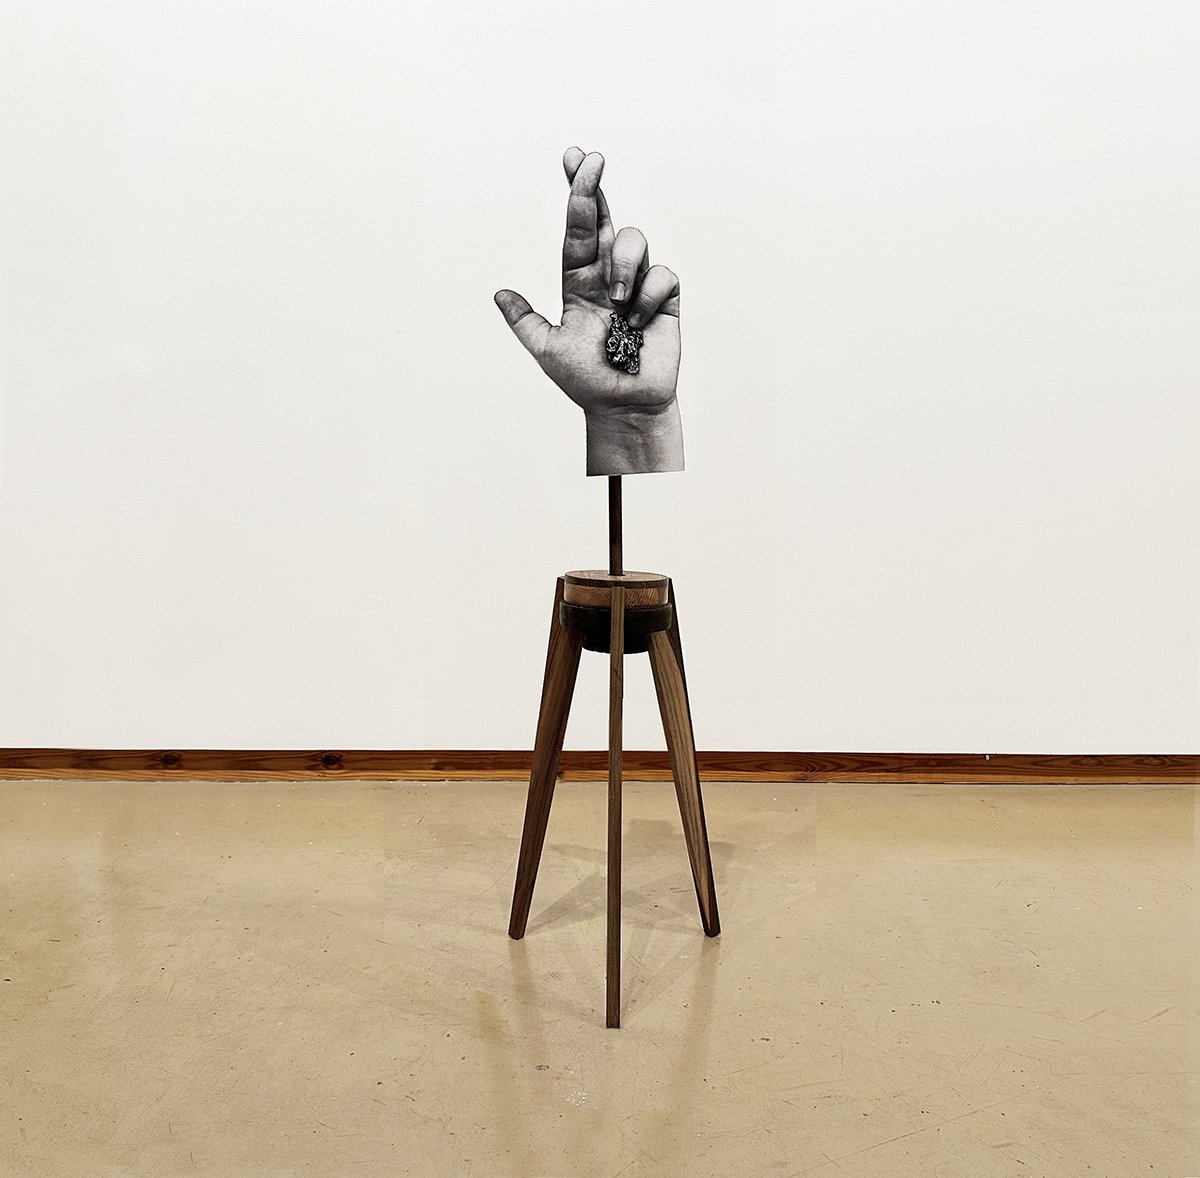 Sean Miller, Photosculpture Illustrating Hand Exercise to Safely Induce the Hodges Effect, 2021-24